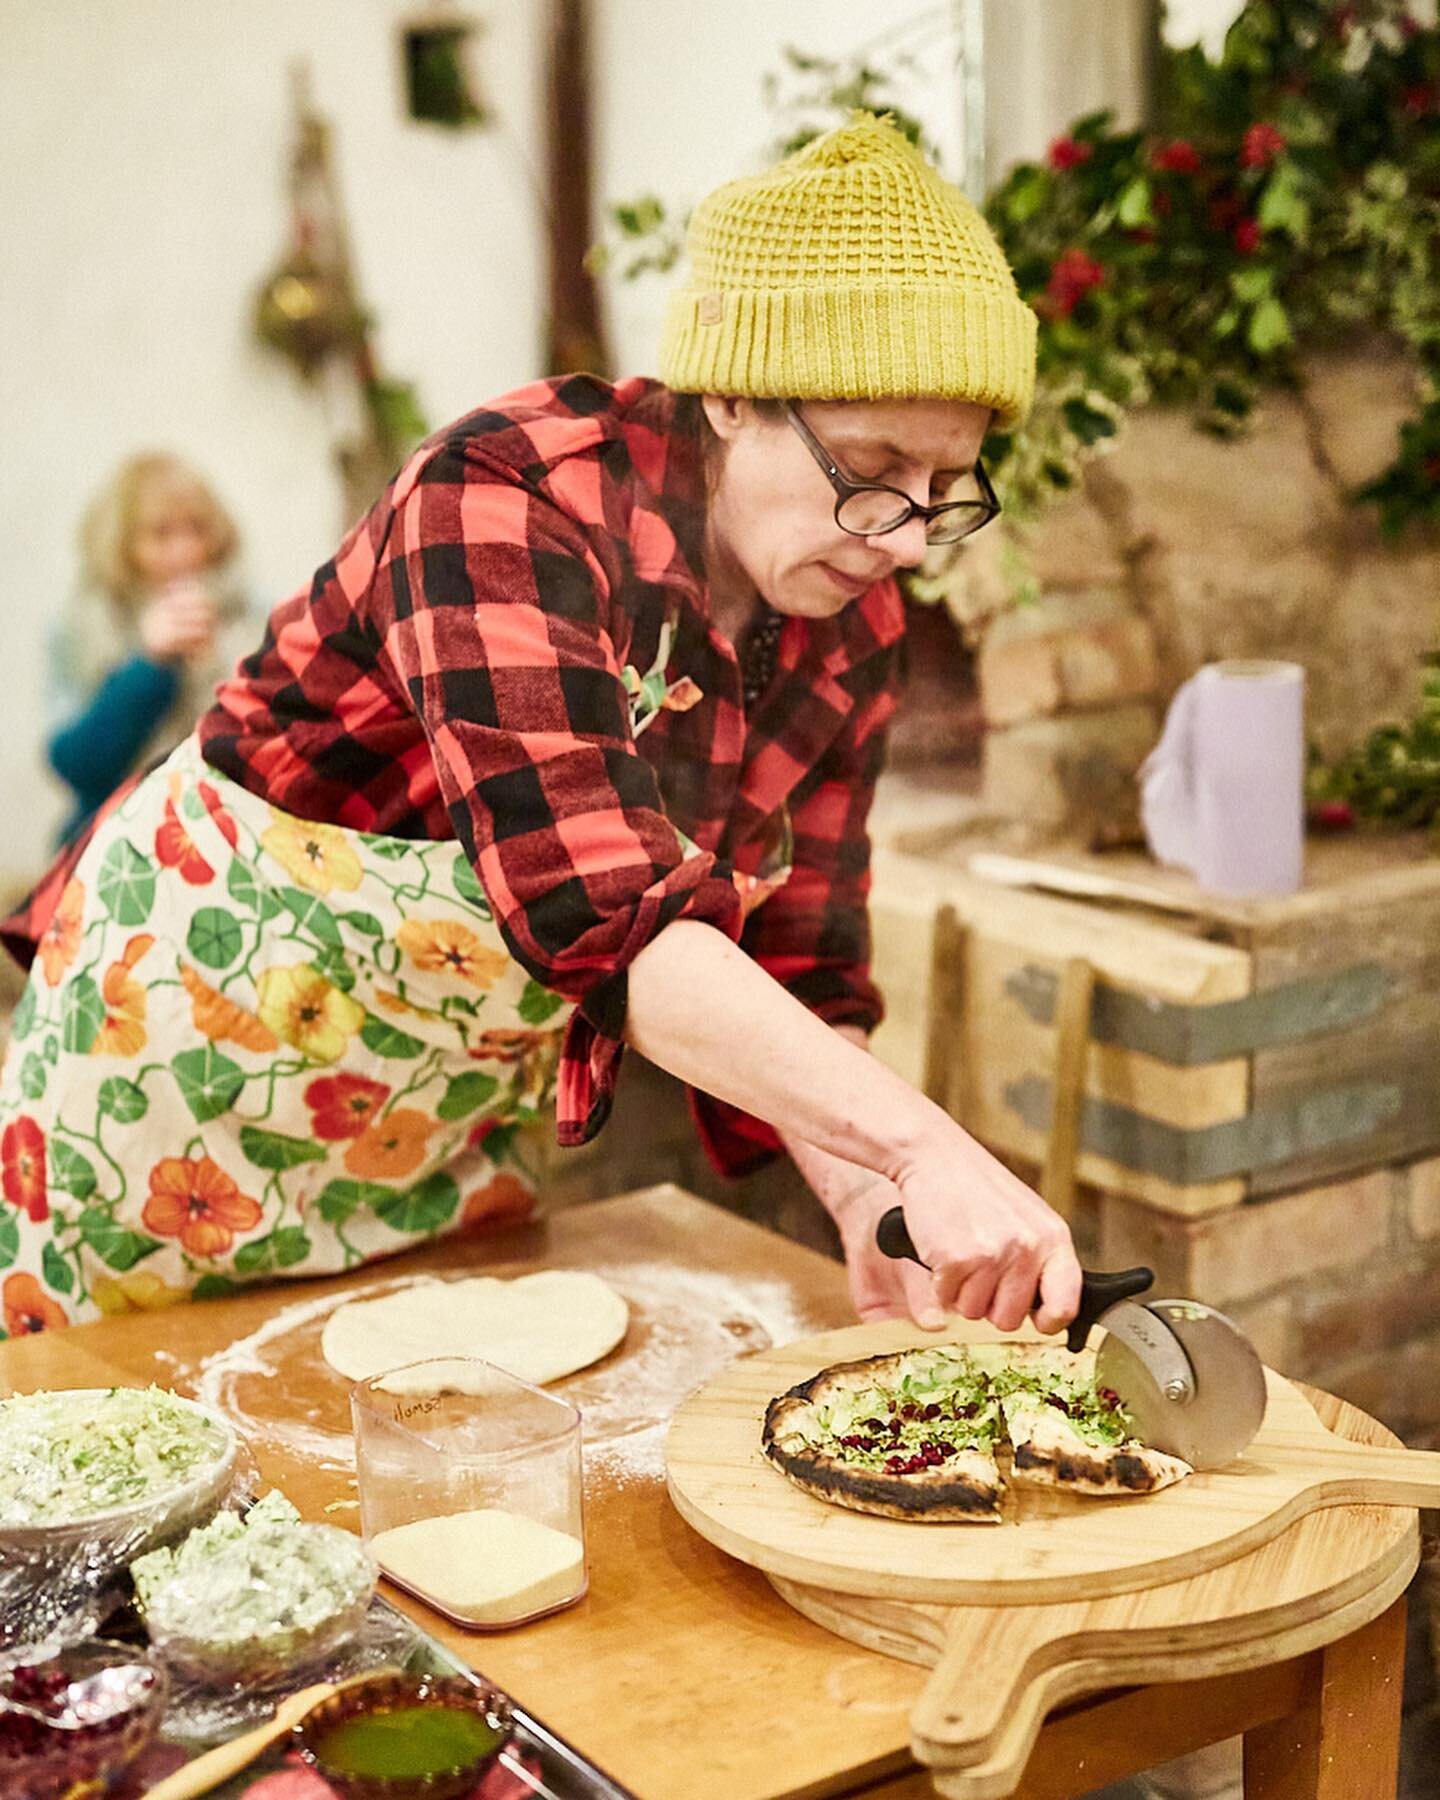 We finished nine nights of our Winter Solstice supper clubs last night - our biggest supper club series by far. Here&rsquo;s a few delicious highlights&hellip;

1. @flustercat making delicious flatbreads to welcome the guests - this is sprouts, sage 